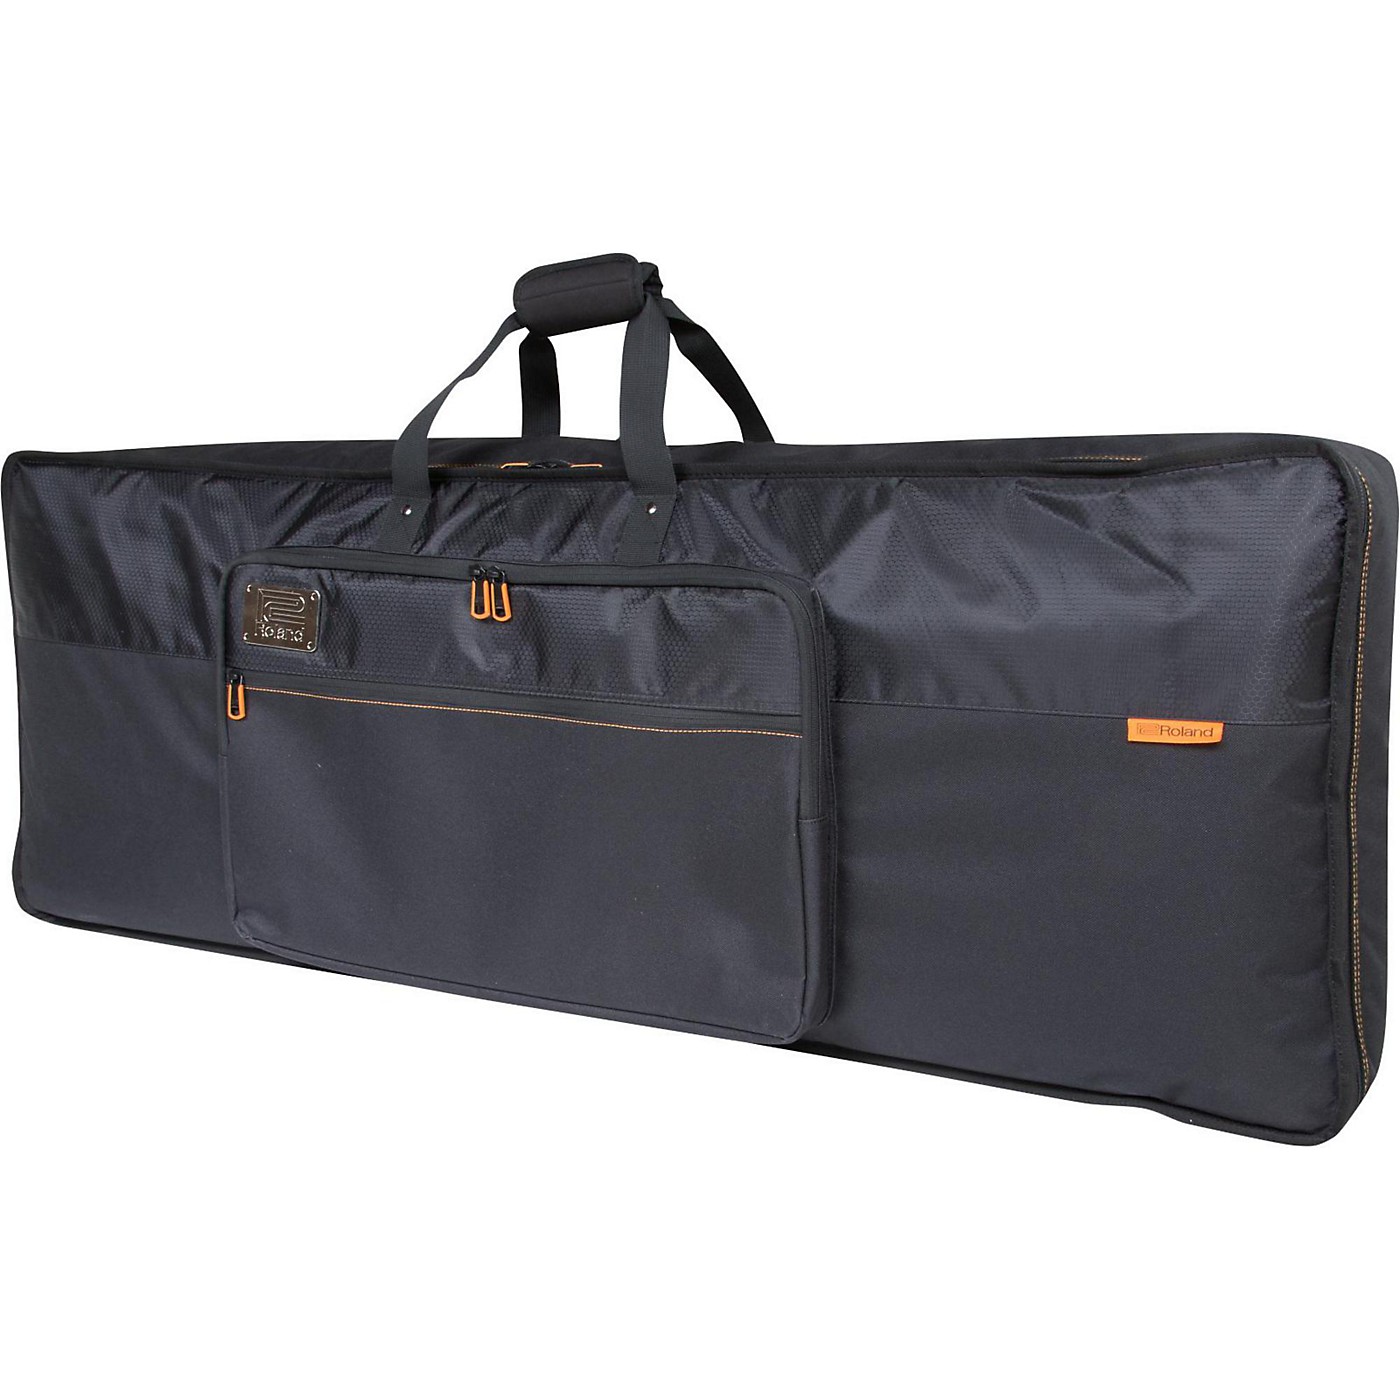 Roland Black Series Keyboard Bag with Backpack Straps - Deep thumbnail